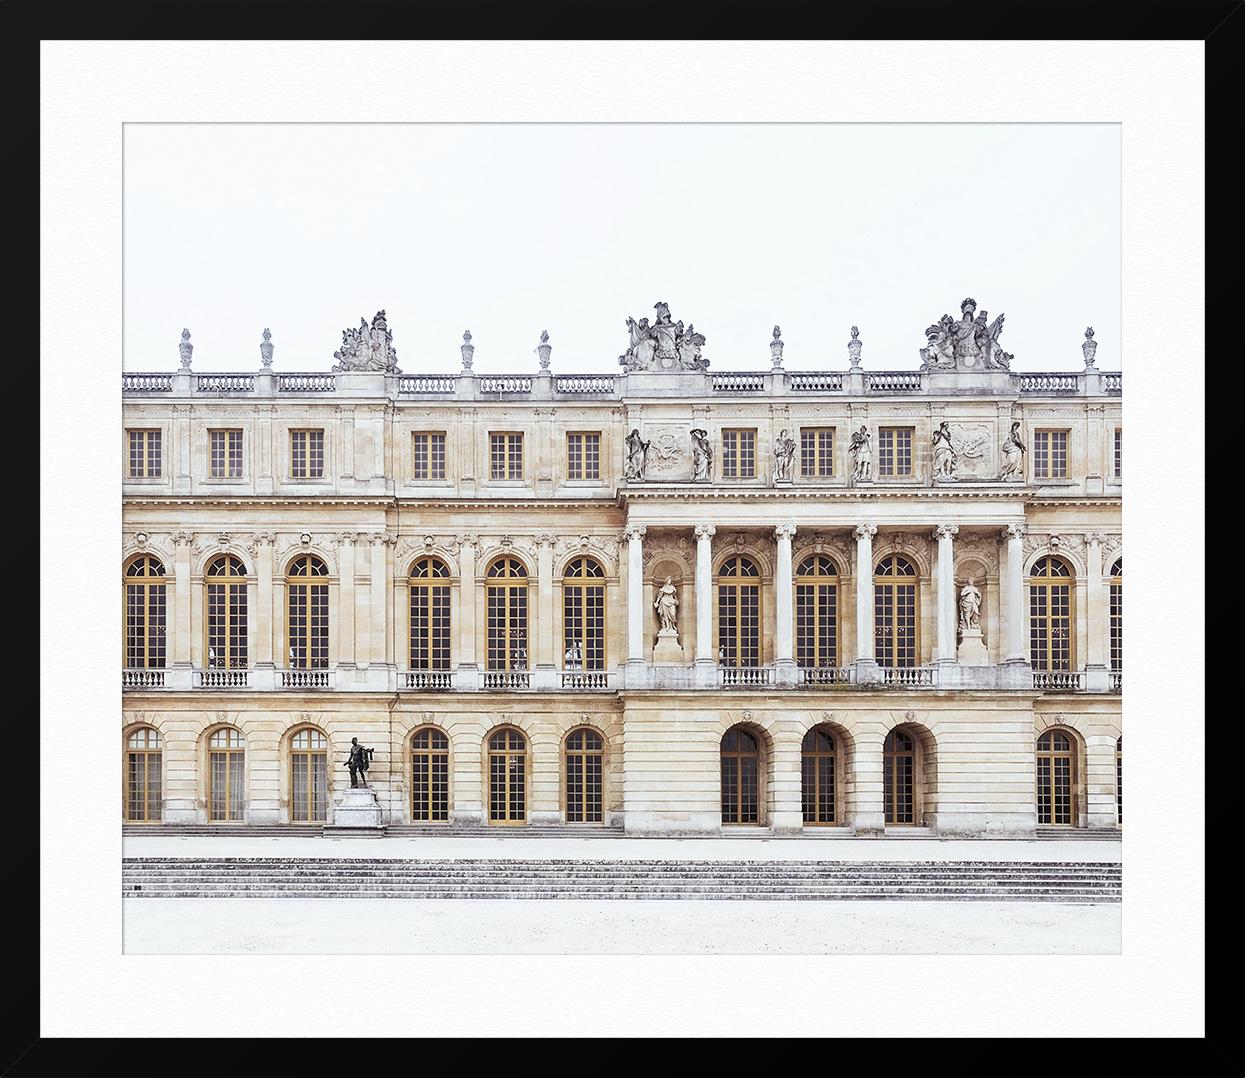 ABOUT THIS PIECE: Ludwig captures the monumental architecture of Paris with the romantic eye of a Parisian. Favre is known for his soft palette, interesting crops and large scale photographs.

ABOUT THIS ARTIST: Photographer Ludwig Favre was born in